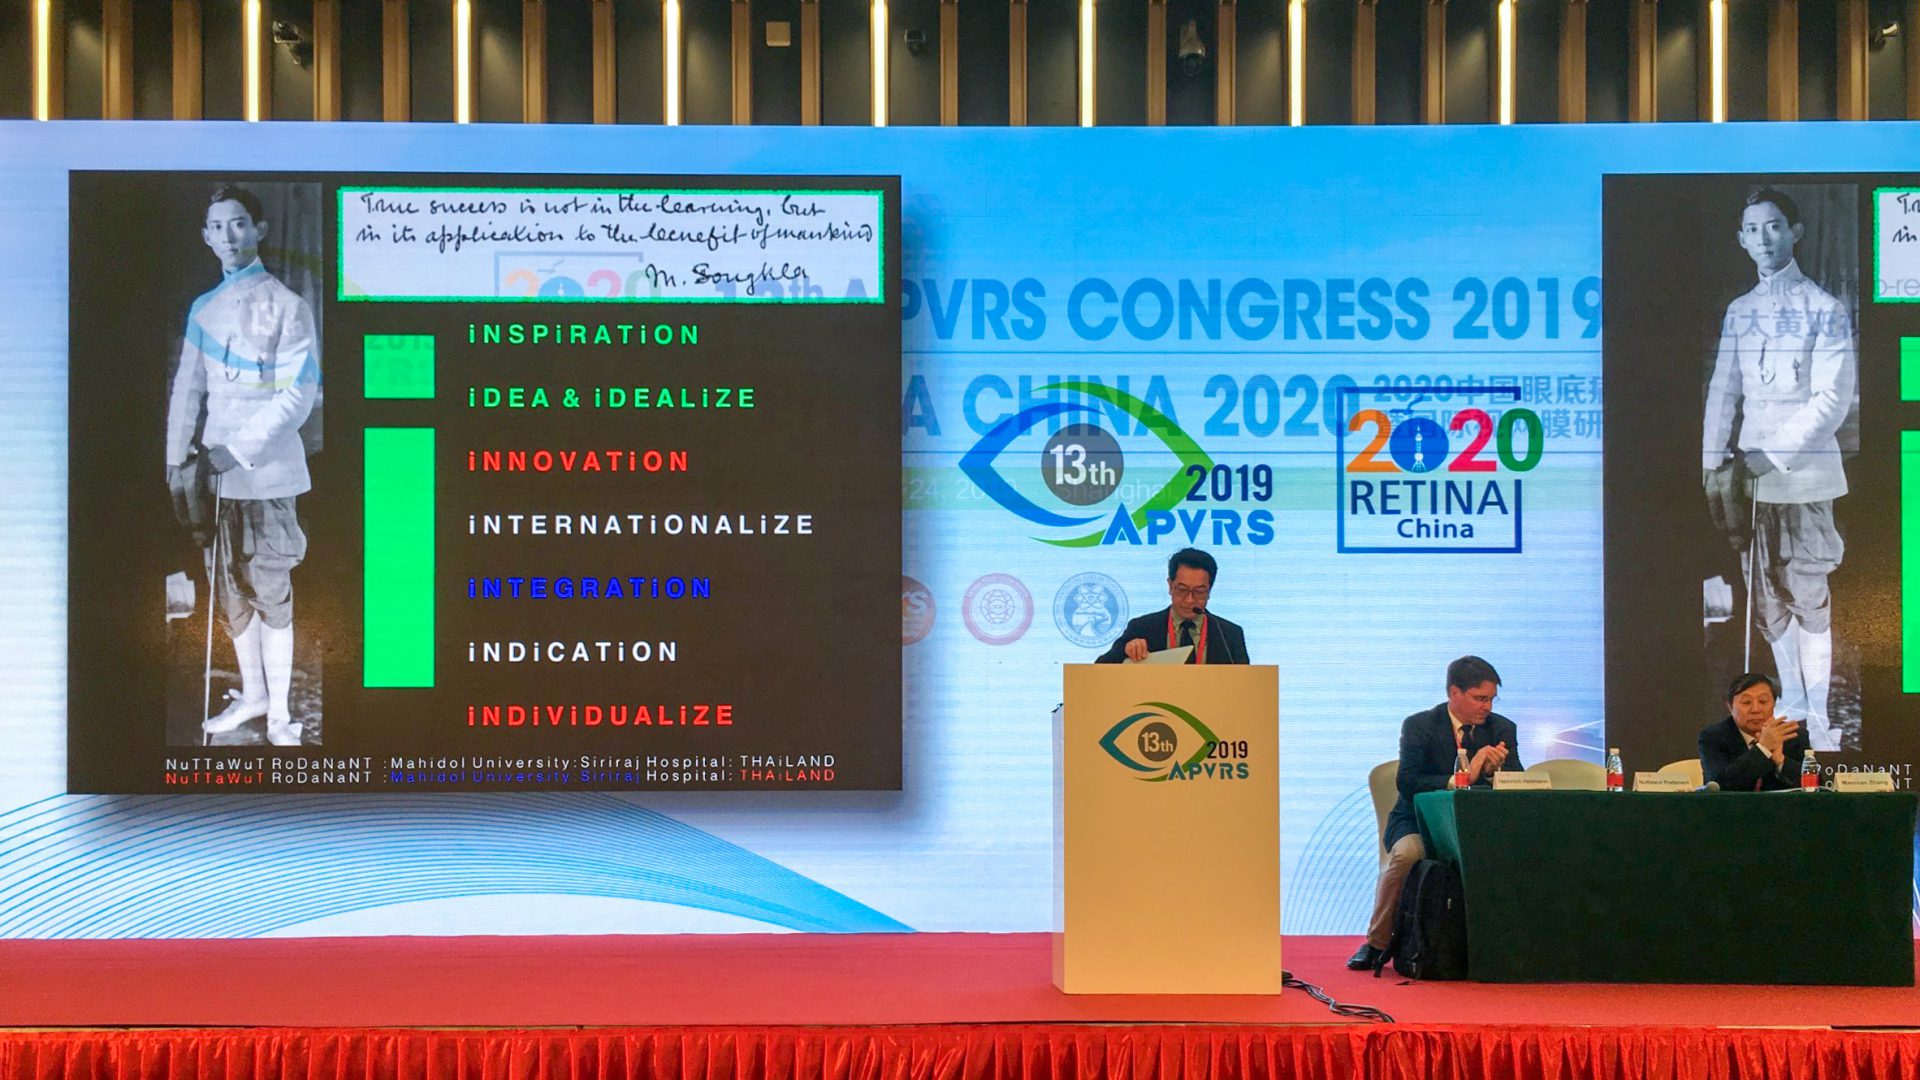 Siriraj Faculty Delivered a Lecture at 13th APVRS Congress in China